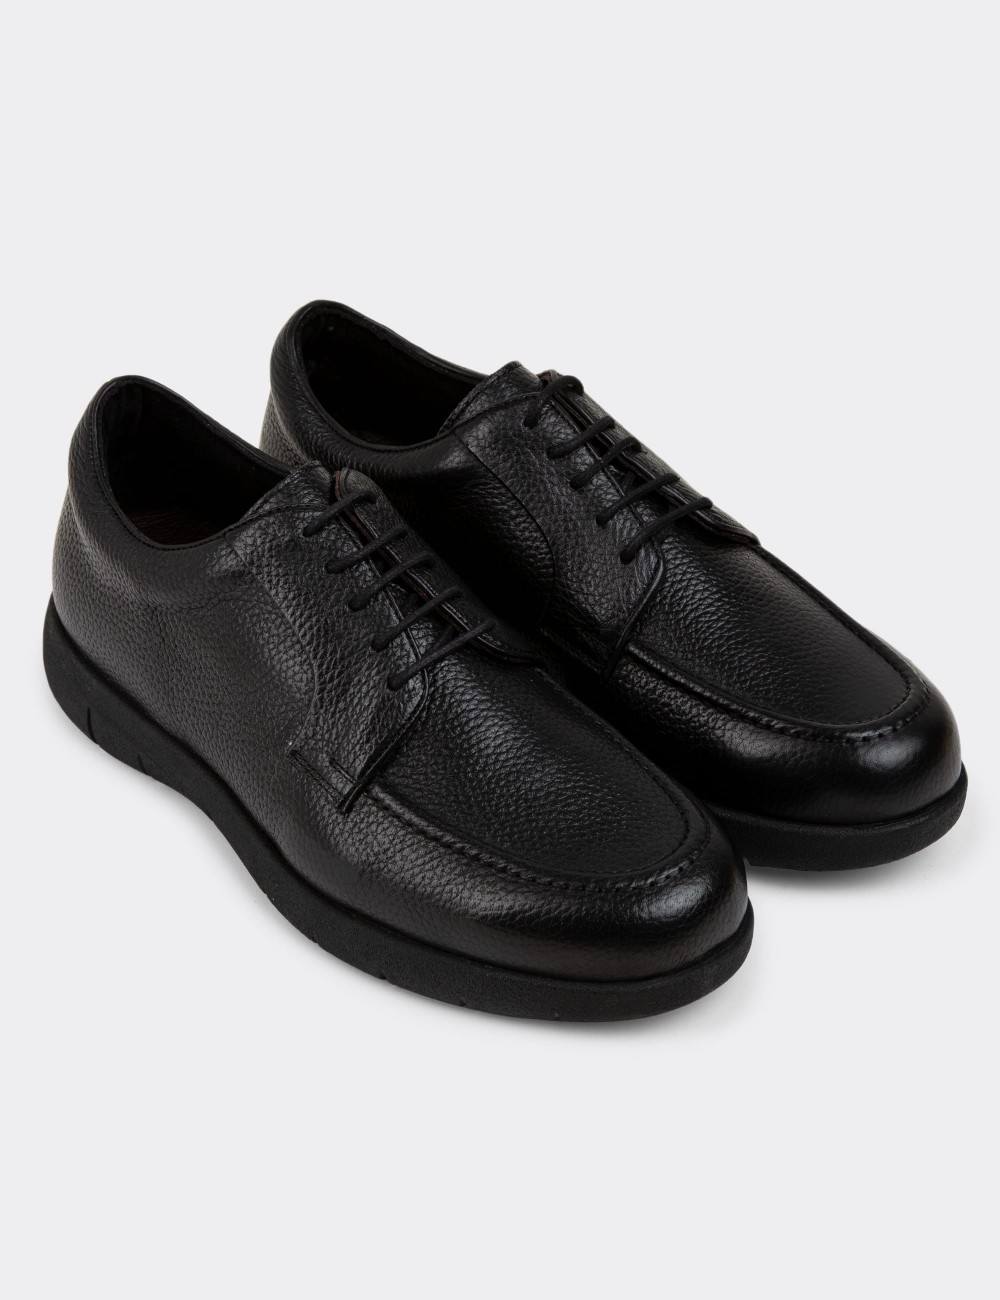 Black Leather Lace-up Shoes - 01930MSYHC02